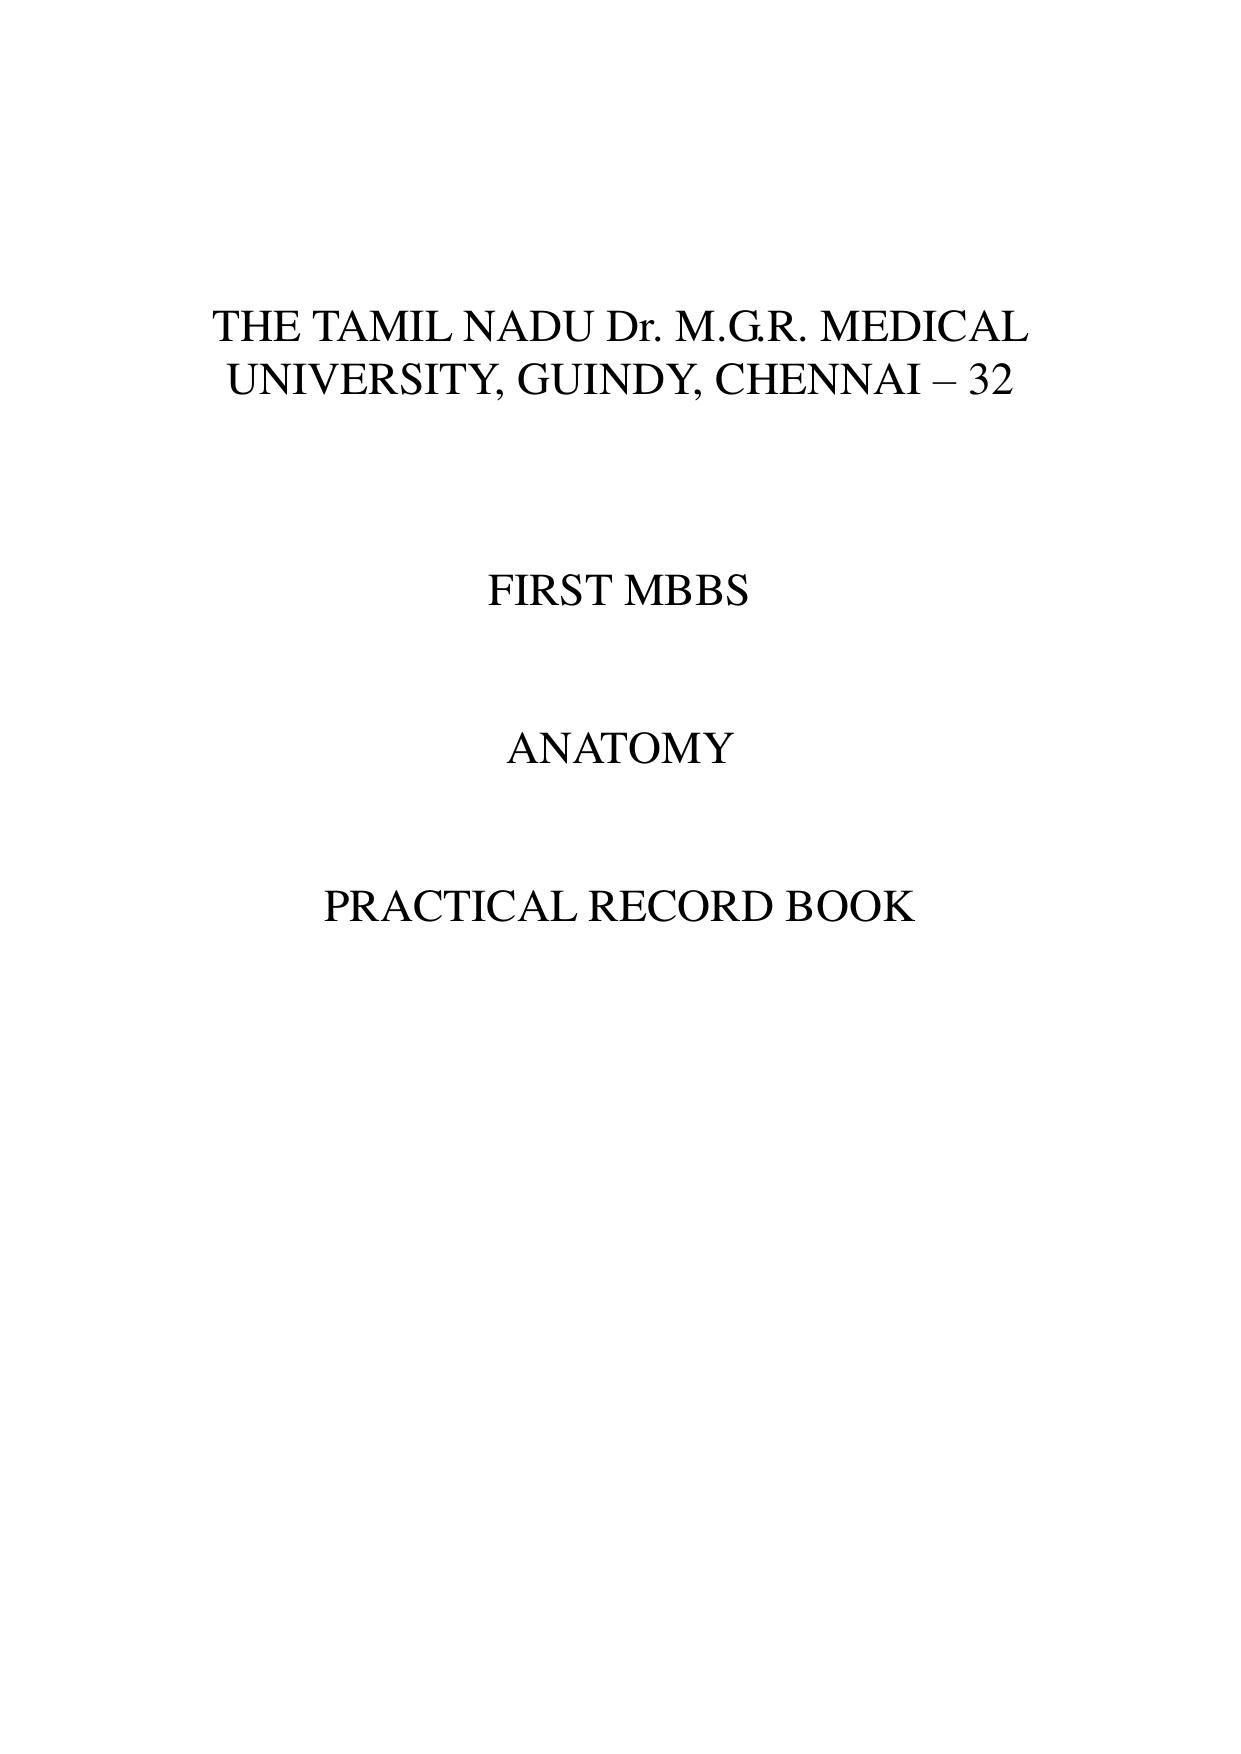 MBBS First year record book-05072017